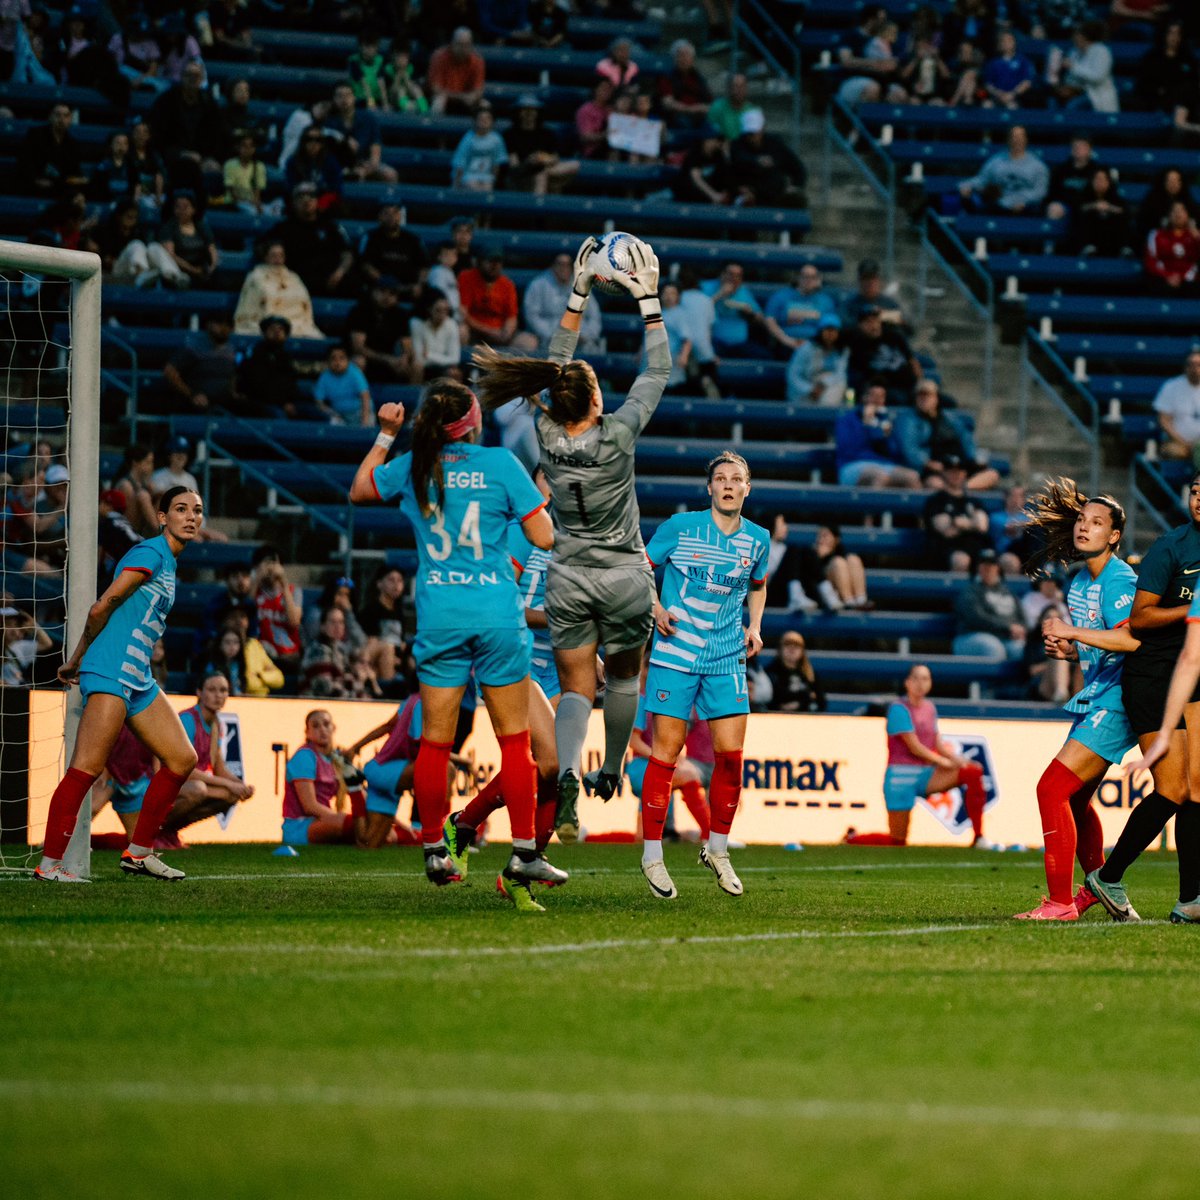 A little rusty but grateful to be back #NWSL 
@GettySport